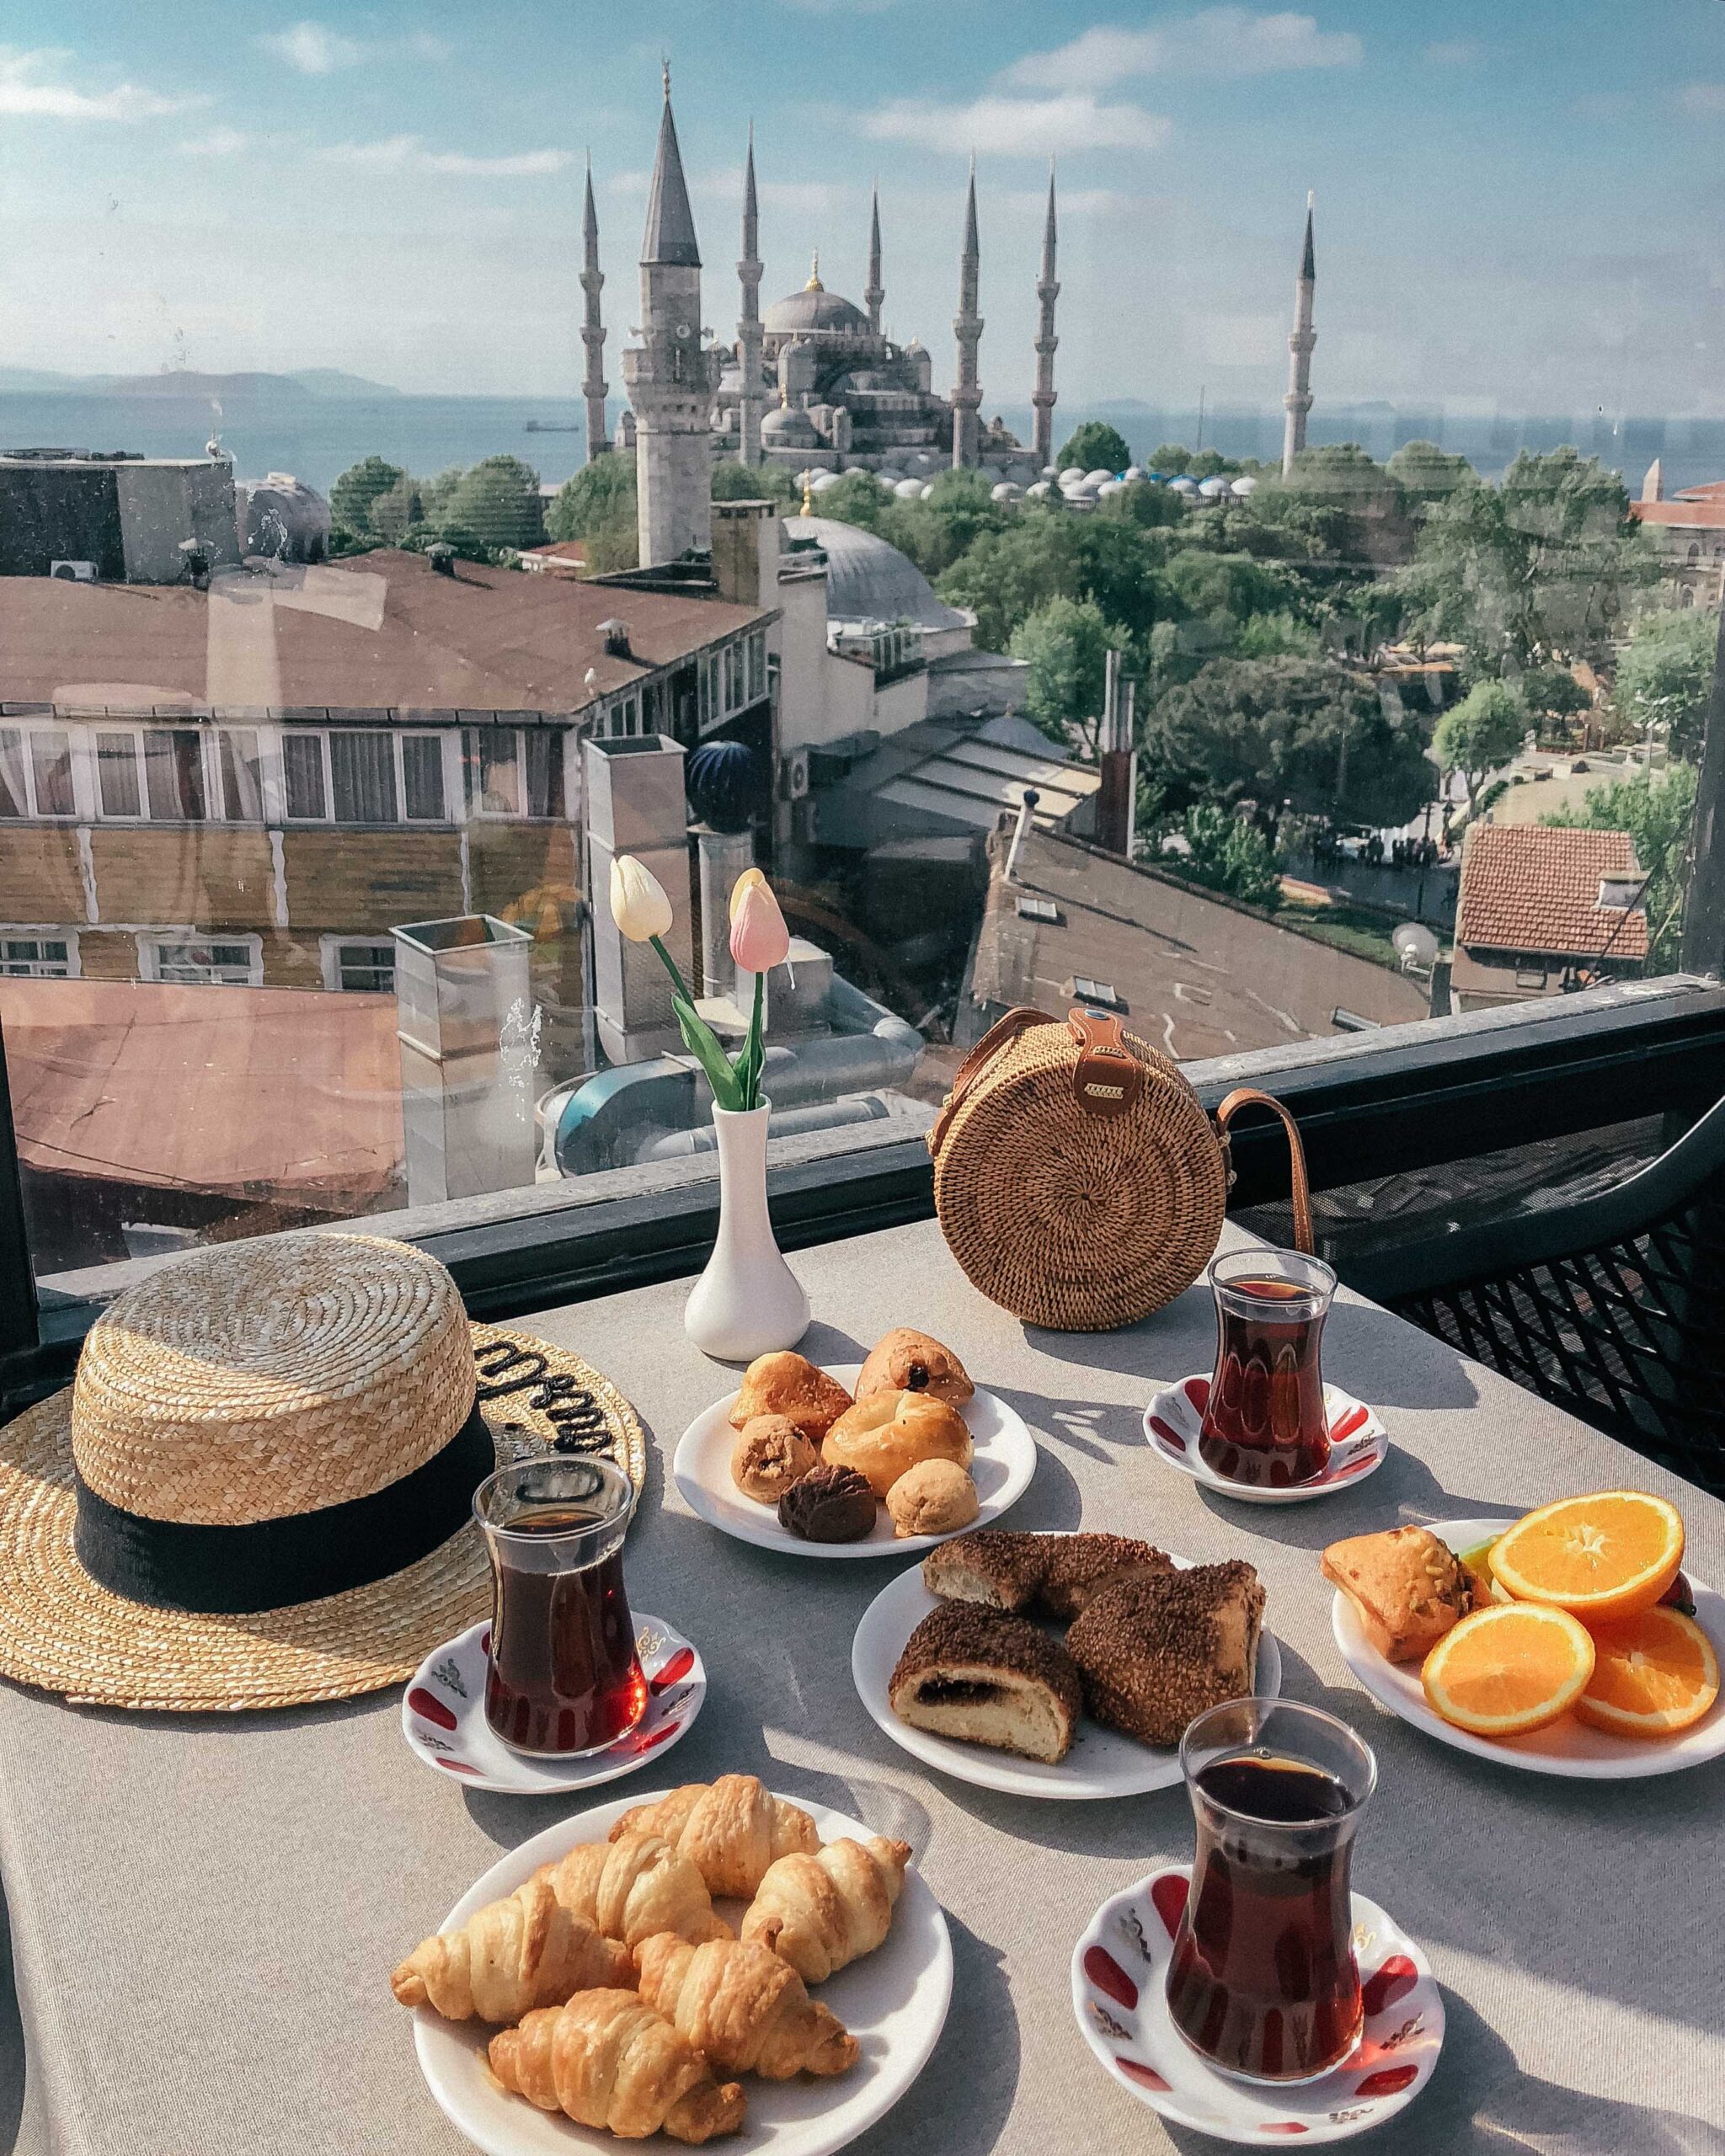 The ultimate guide to Istanbul for first-time visitors that includes the best sights, neighborhoods, rooftops, hotels, restaurants and more.